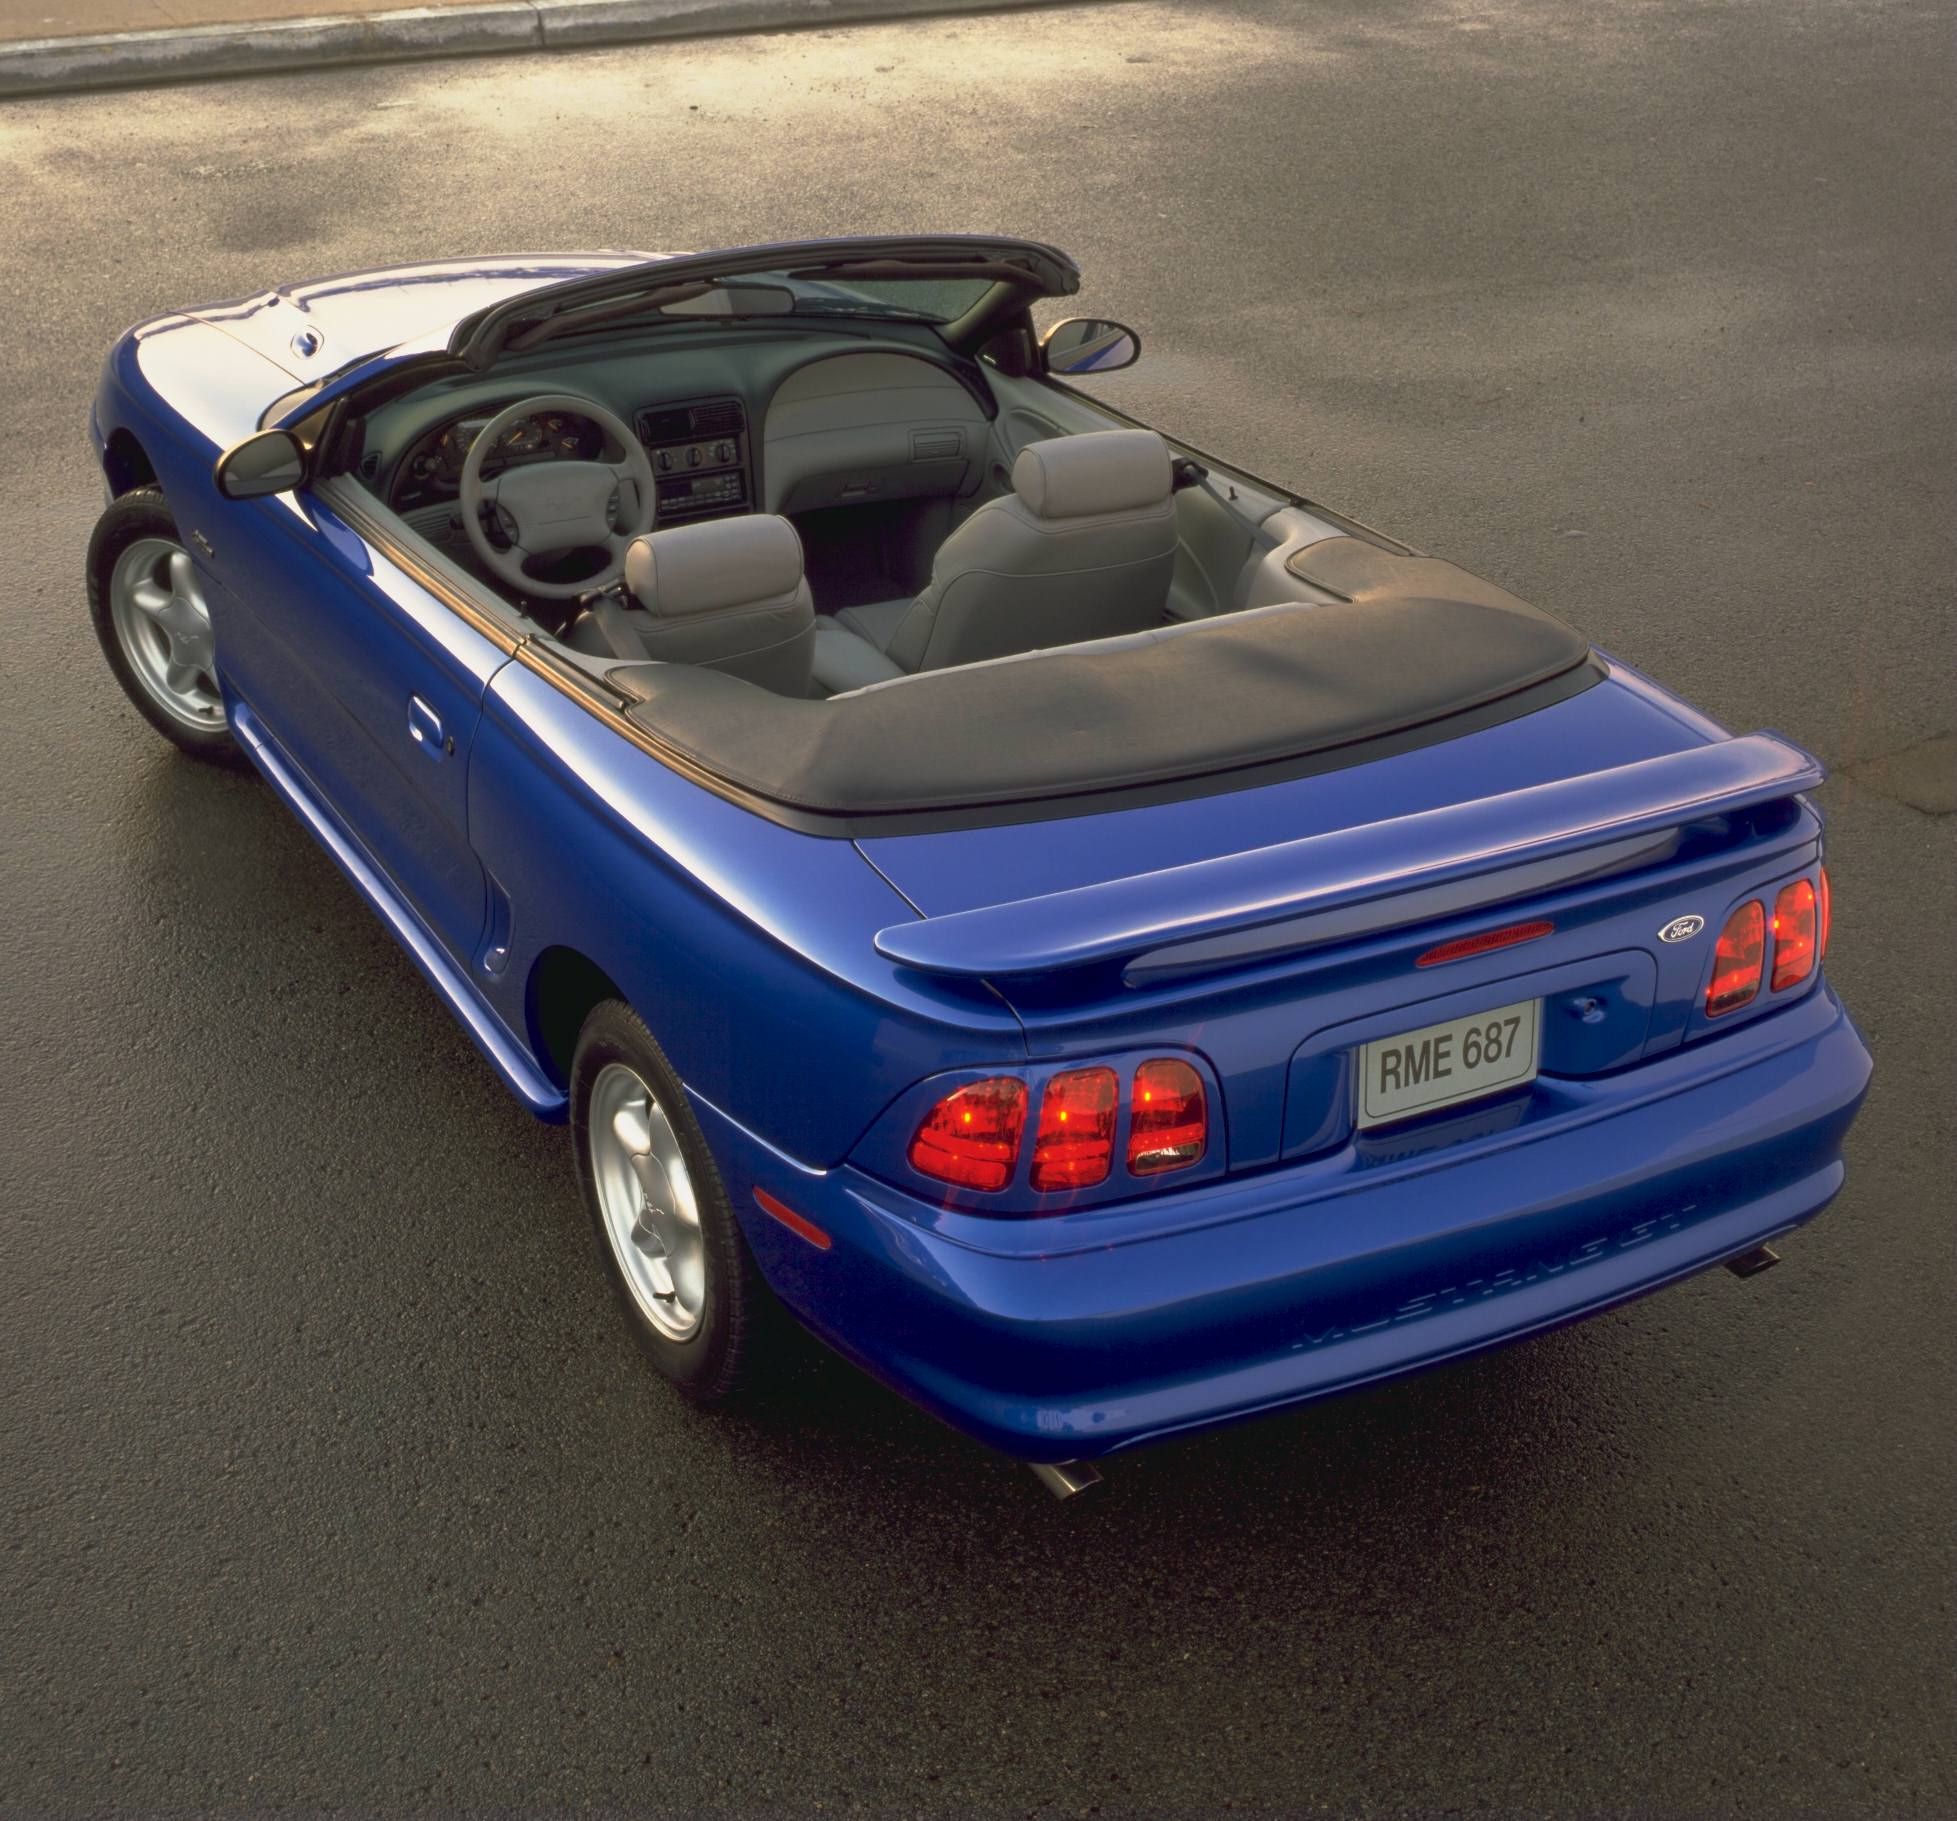 A blue Ford Mustang GT convertible.